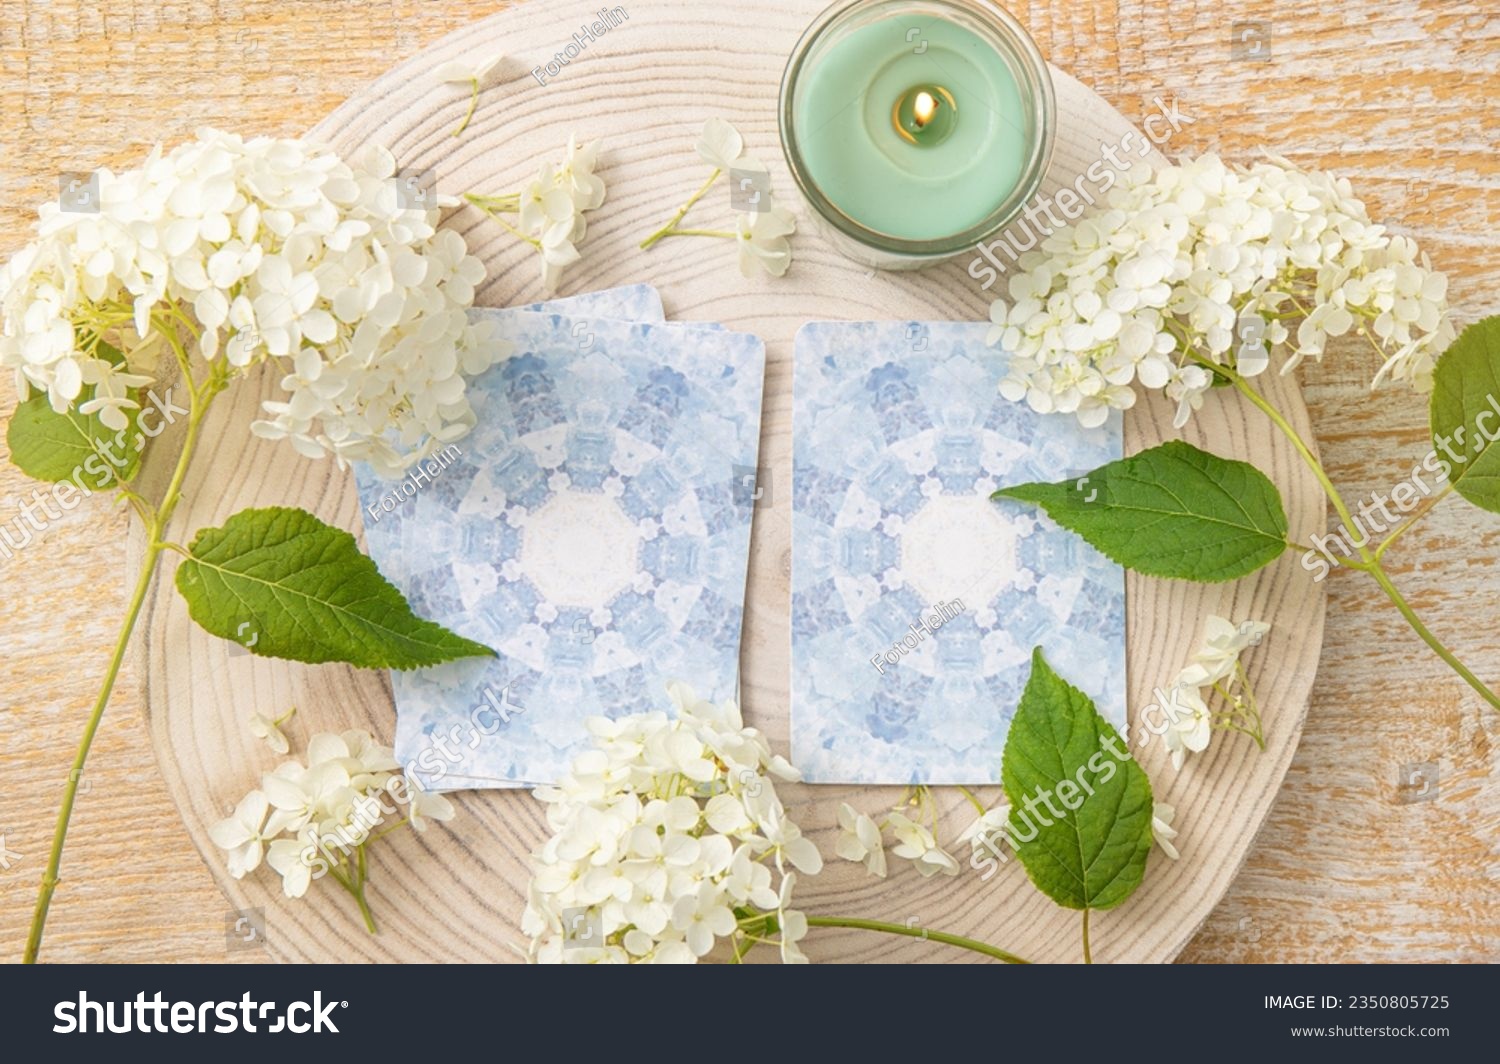 Deck with homemade divination Angel cards on wood table with hydrangea flower for decoration. Home indoors candle burning. #2350805725